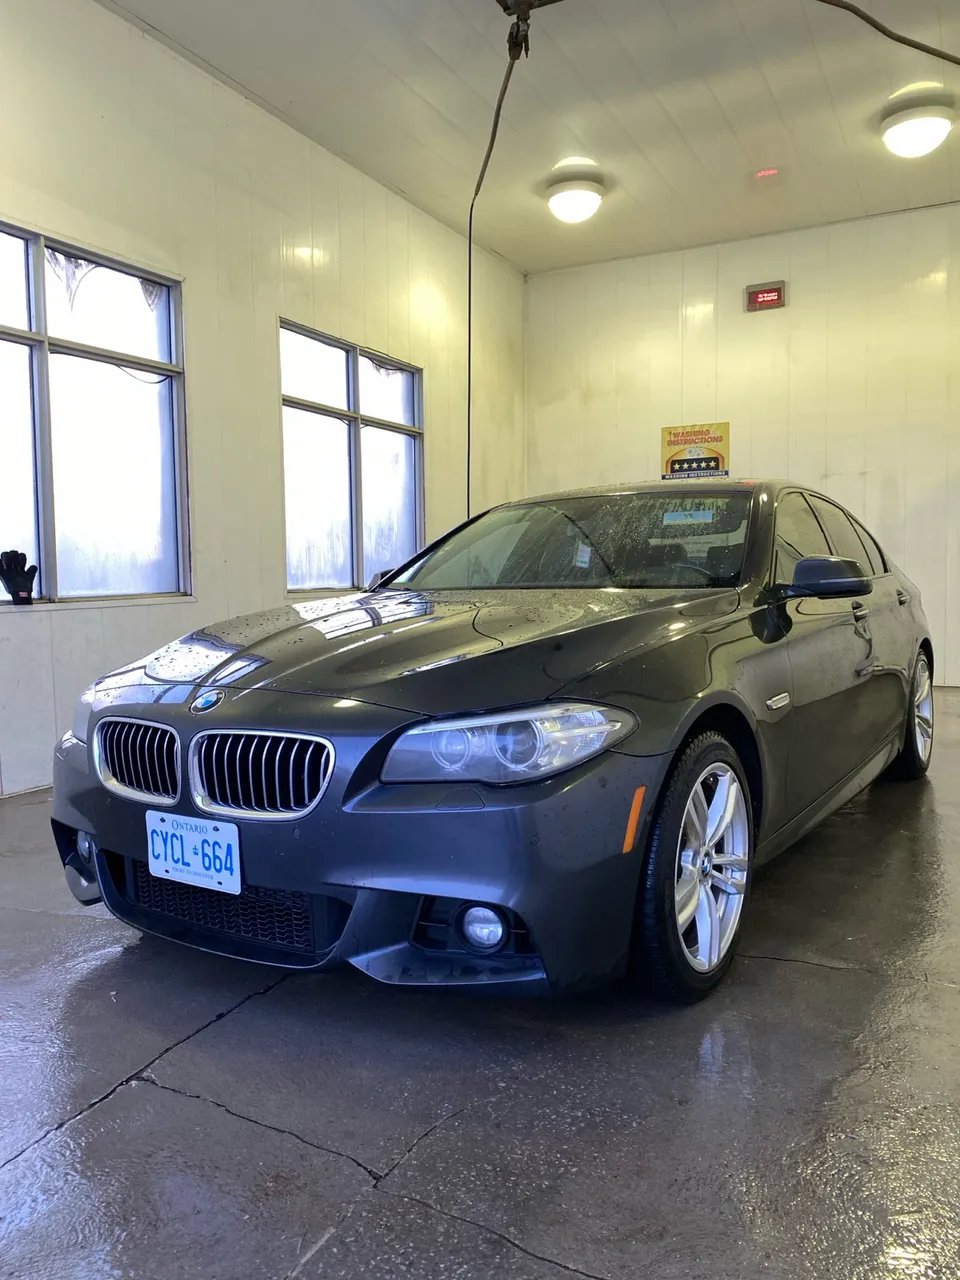 SELLING 2015 BMW 528i XDRIVE (TWO SETS OF WHEELS INCLUDED)